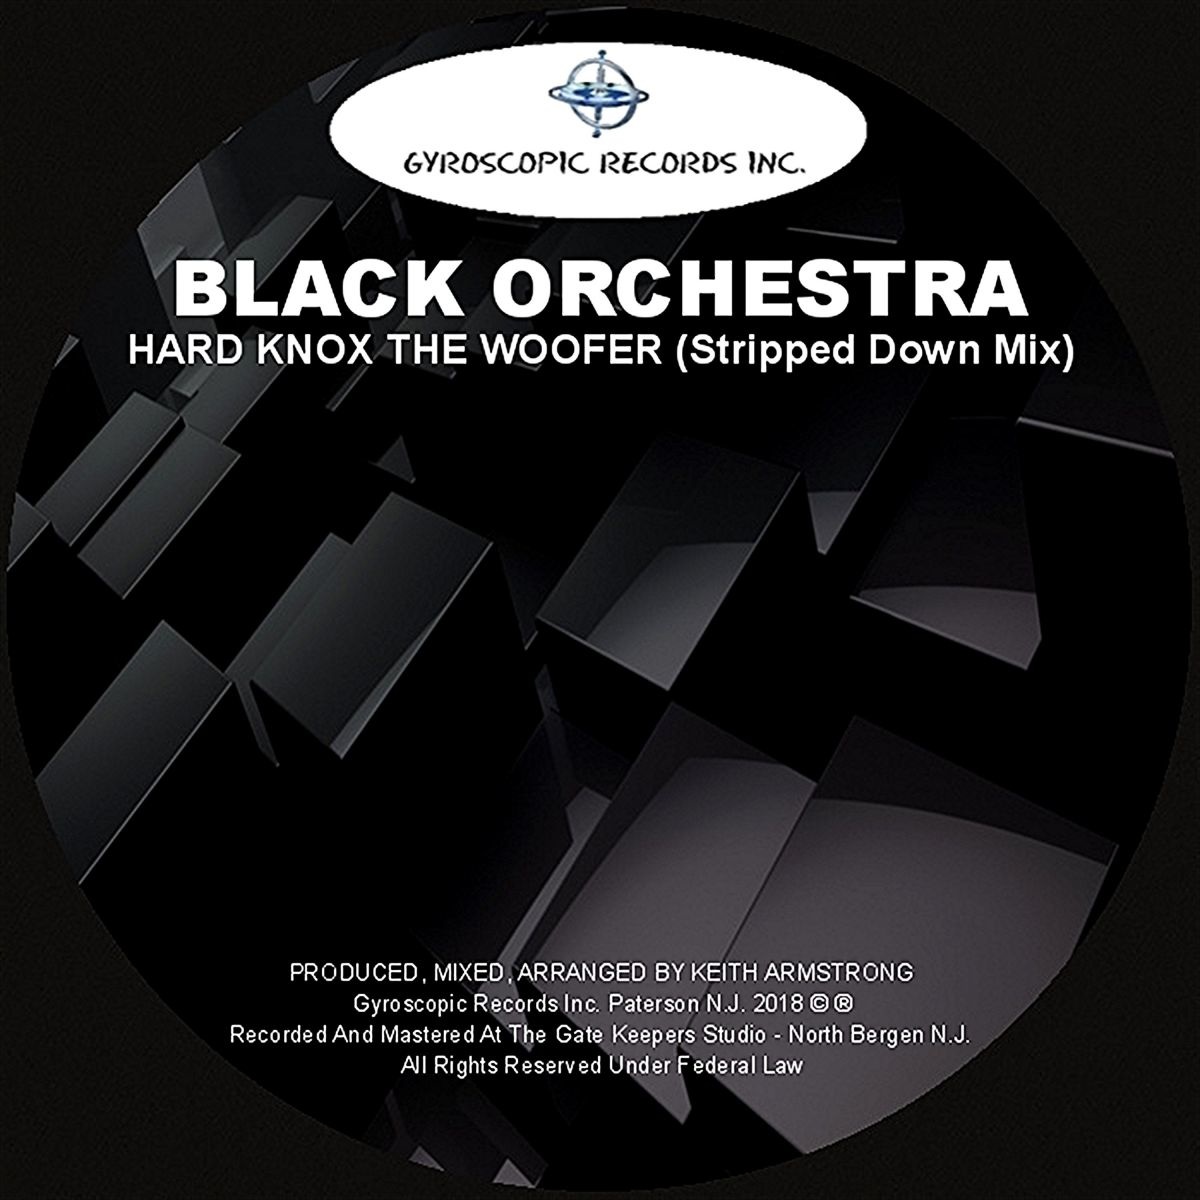 Black Orchestra - Hard Knox The Woofer (Stripped Down Mix) / Gyroscopic Records Inc.